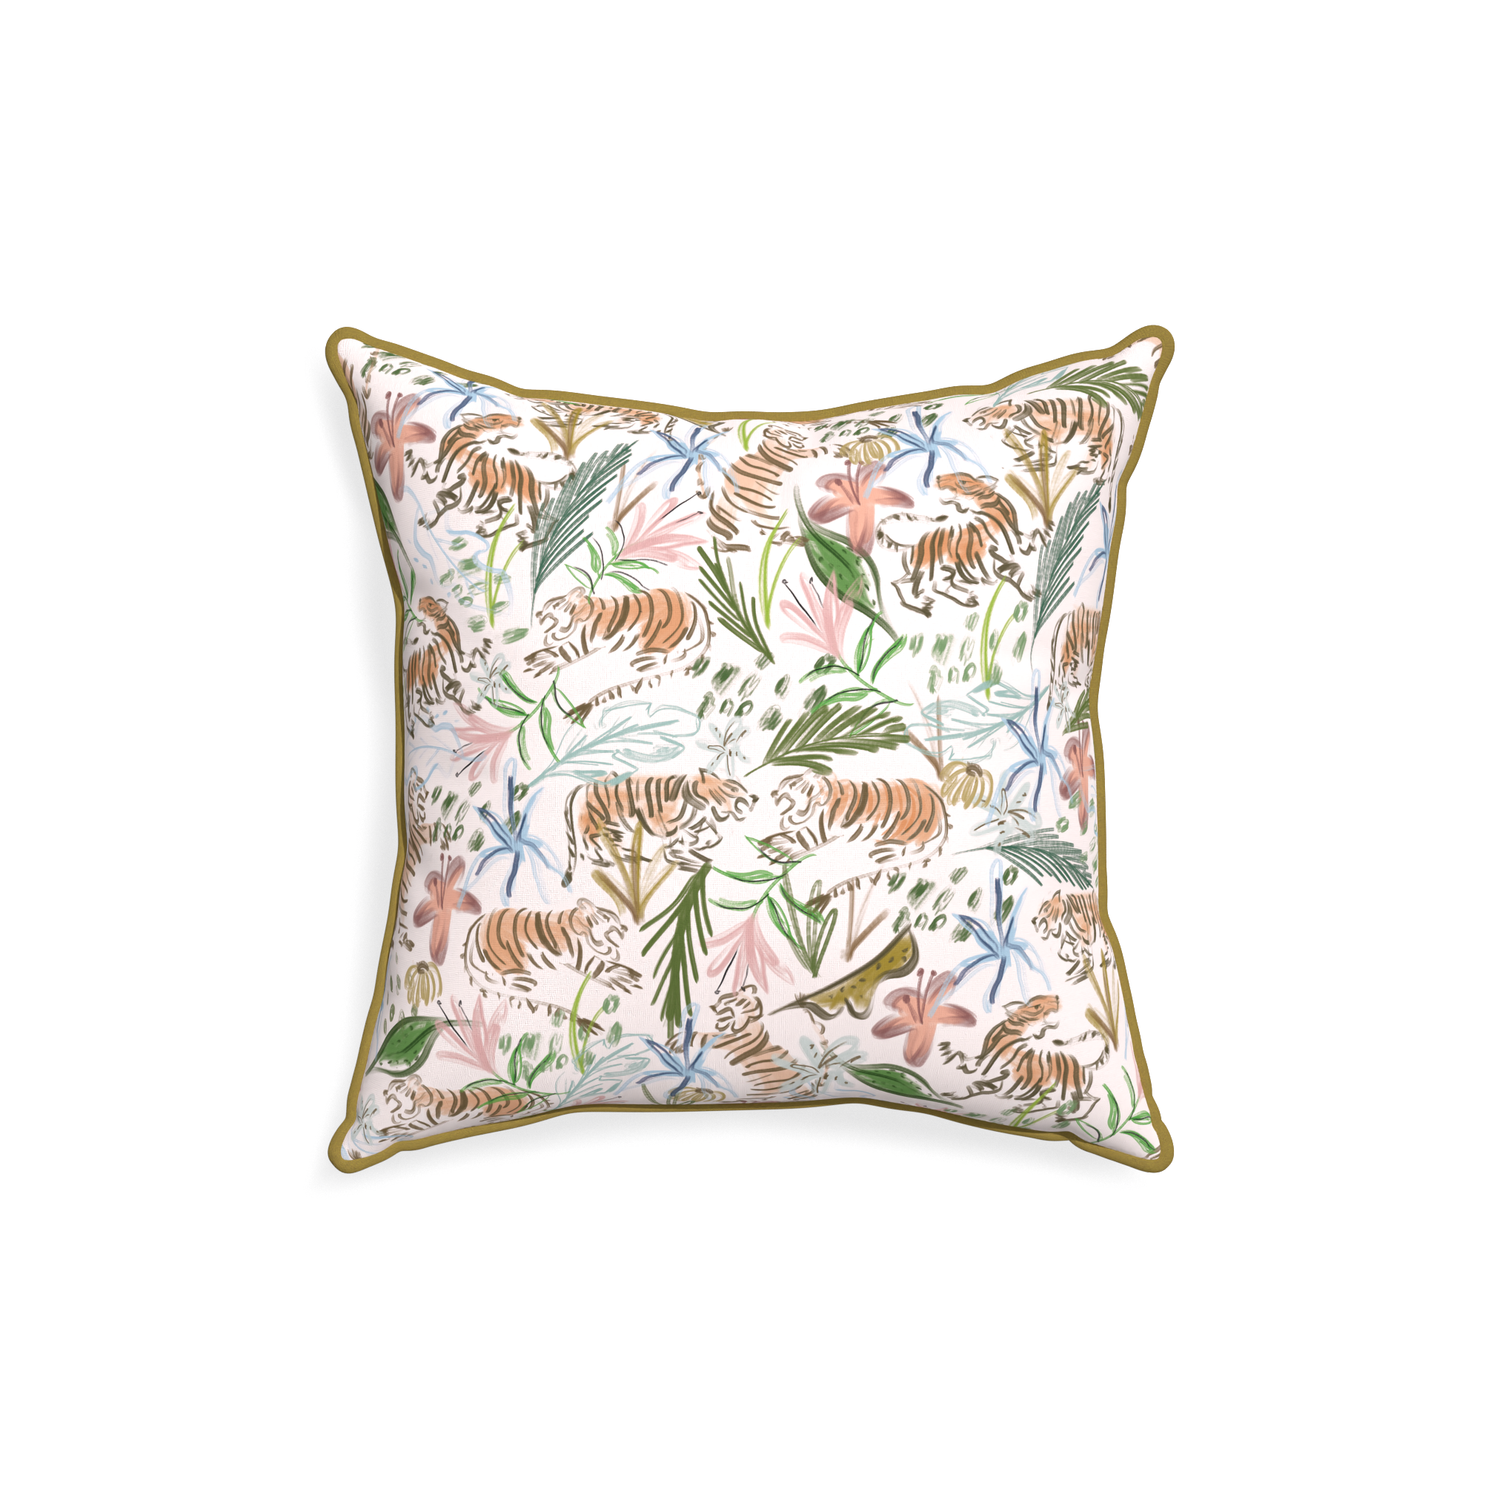 18-square frida pink custom pink chinoiserie tigerpillow with c piping on white background